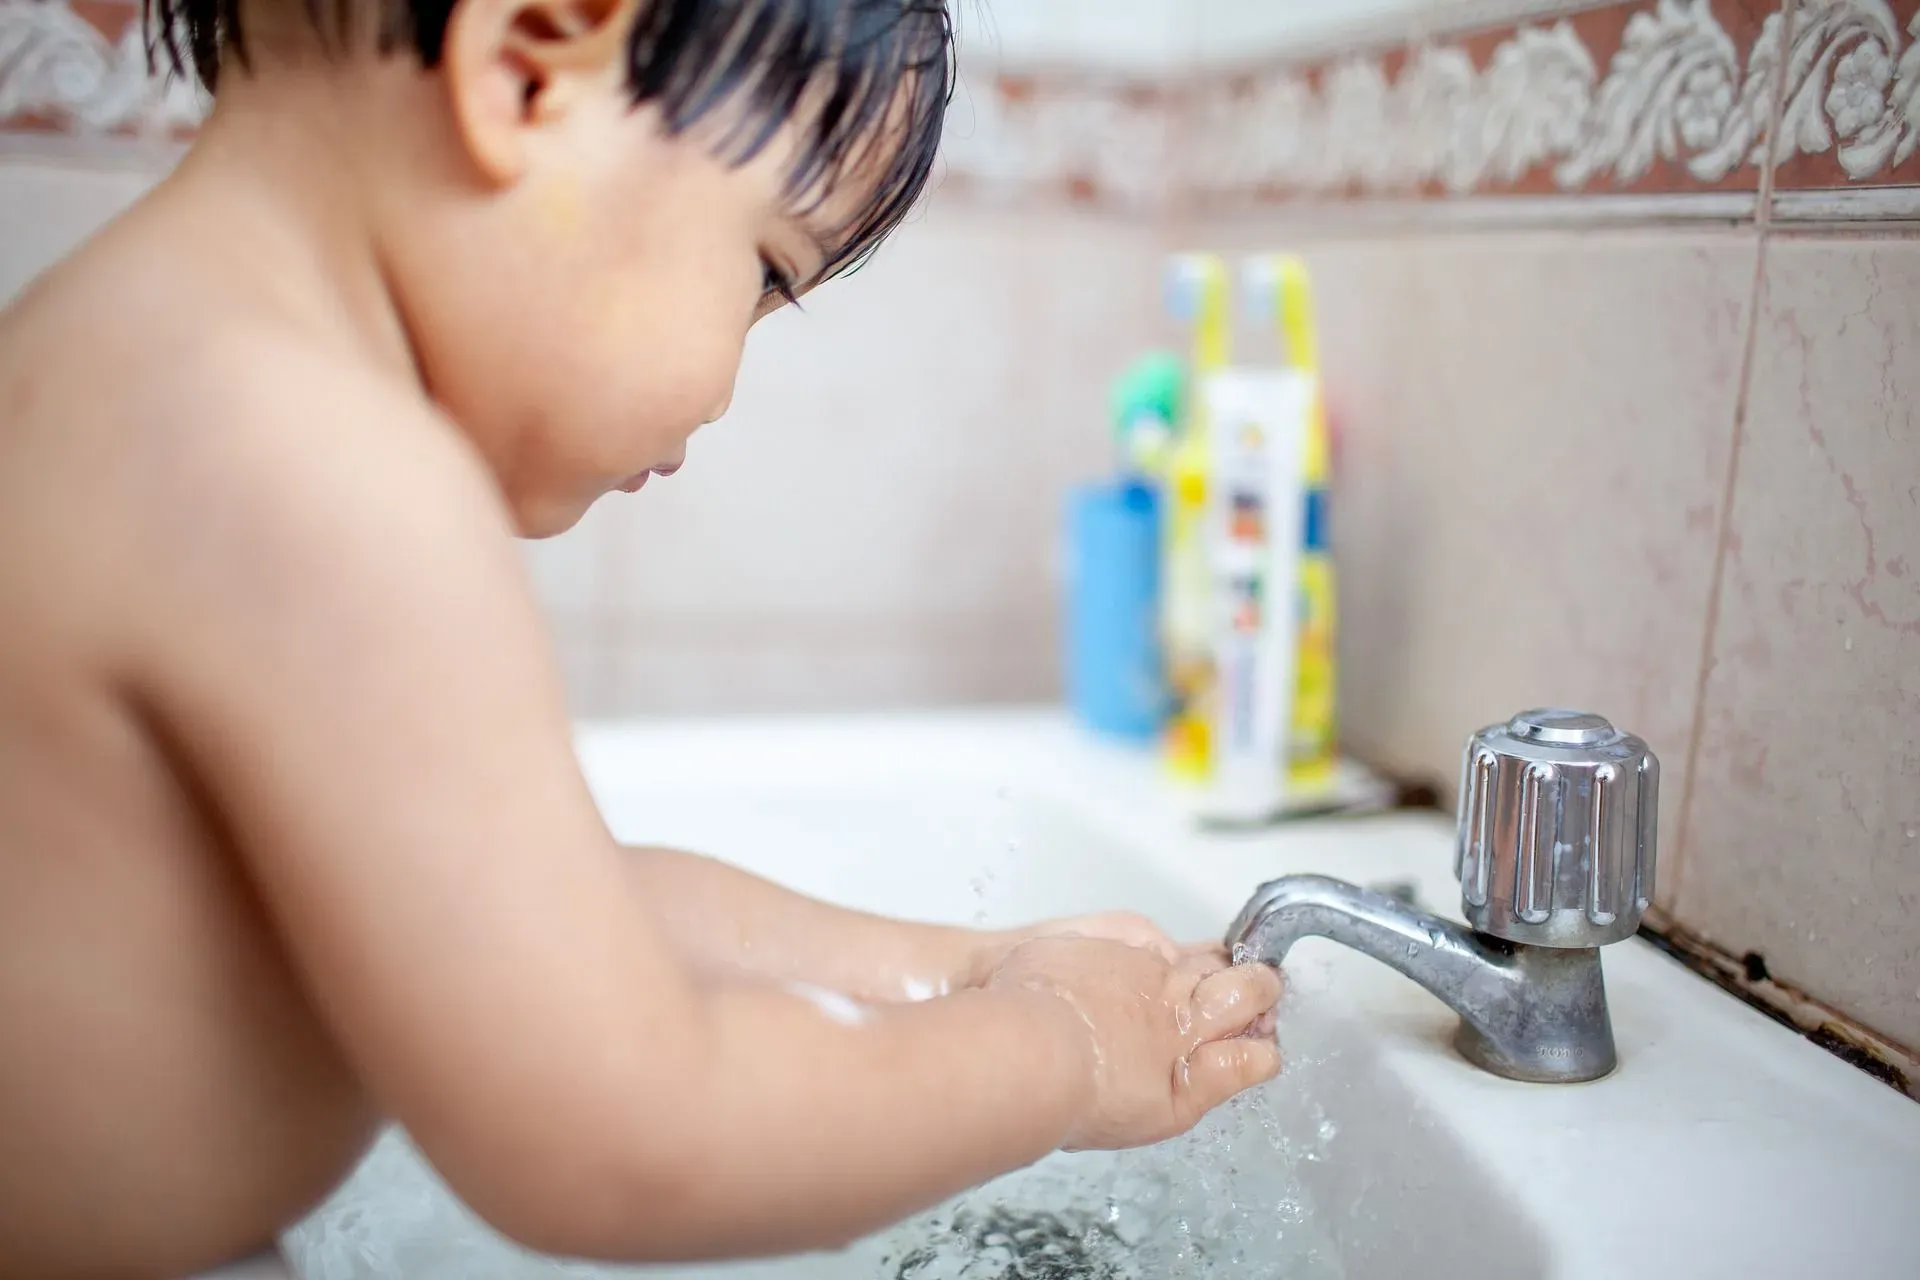 Teaching hand washing for kids at an early age is very important to become a deep-rooted habit.